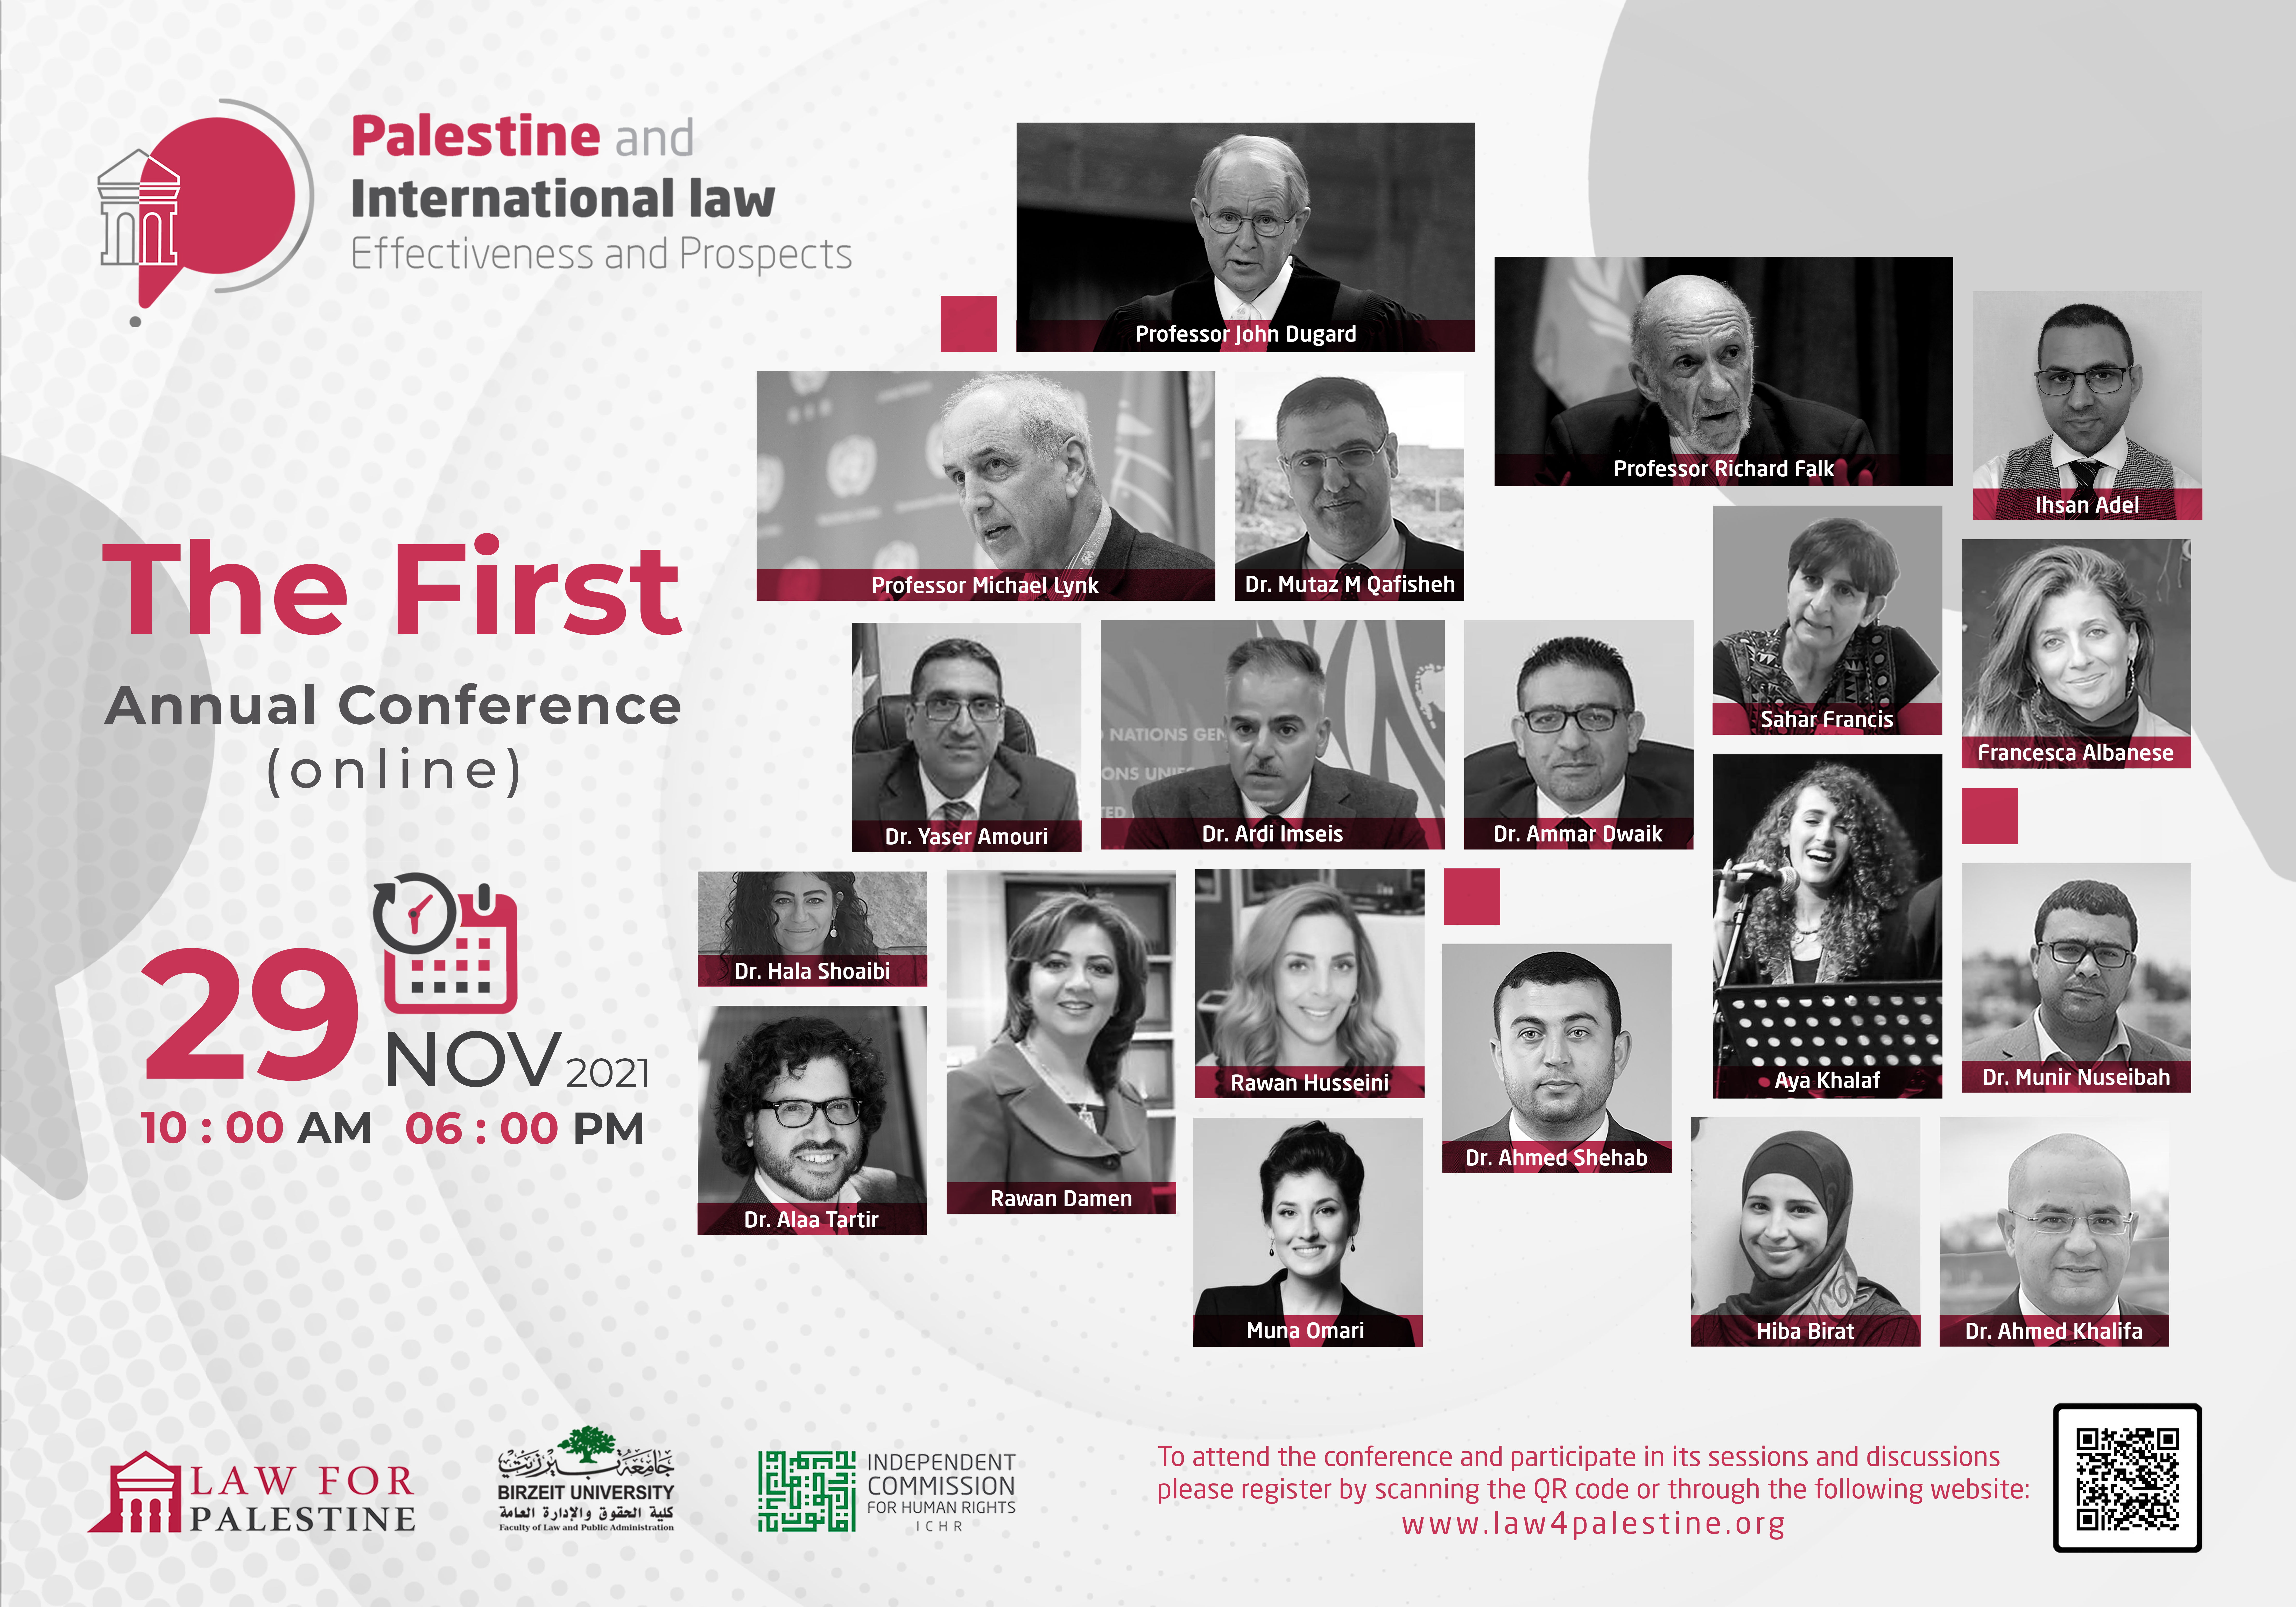 Conference on Palestine and International Law: Effectiveness and Prospects